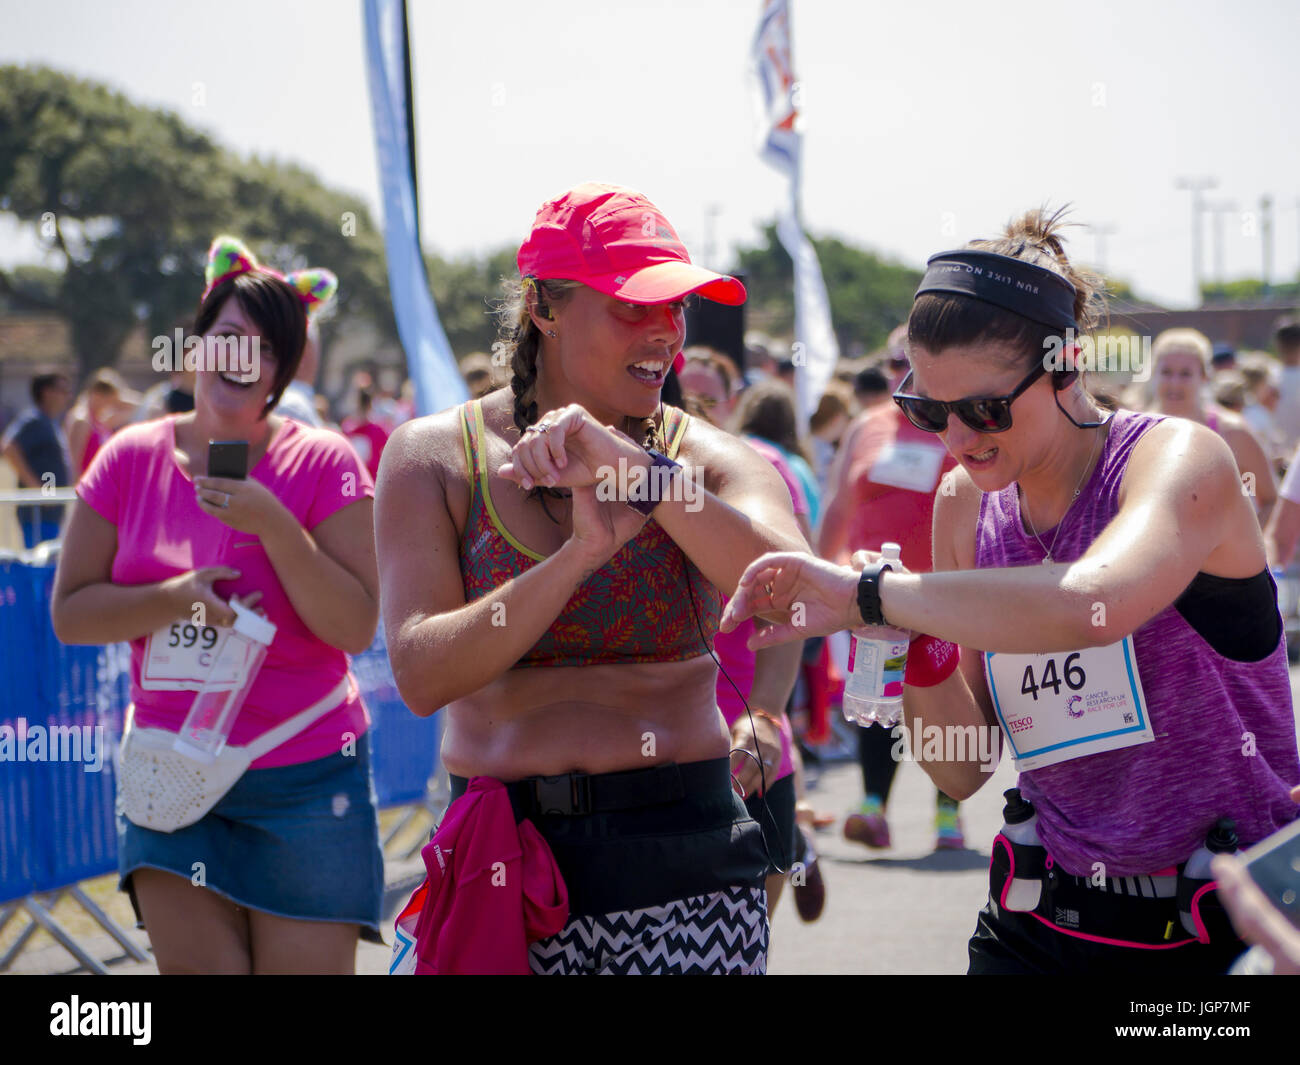 Two ladies check their smart watch GPS timers at the end of a charity fun run. Stock Photo